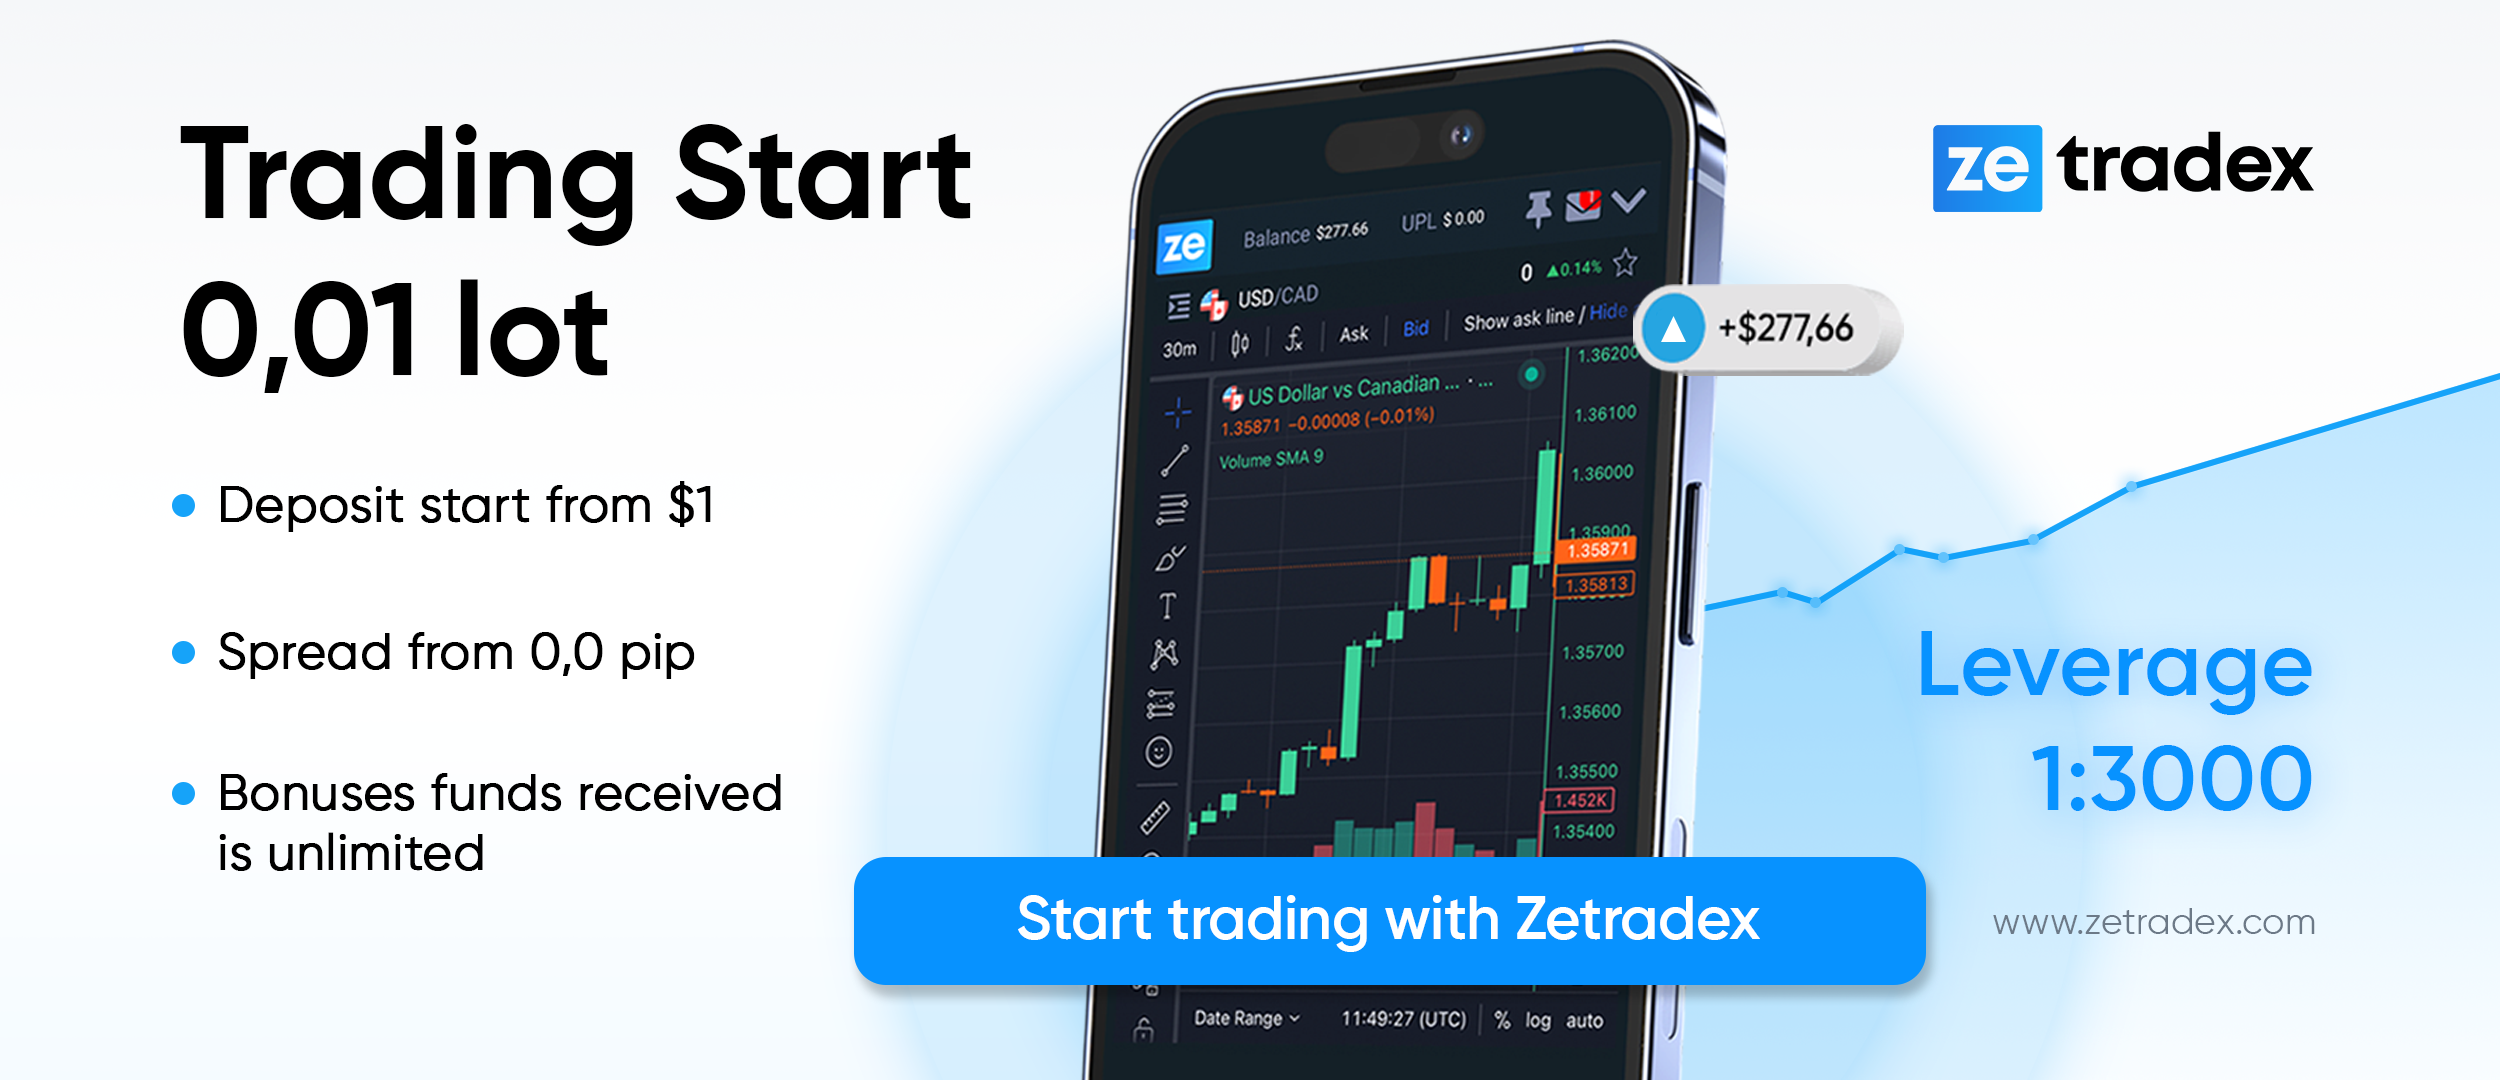 Zetradex: Igniting Success in Forex Trading with Exclusive Bonuses and Tailored Accounts